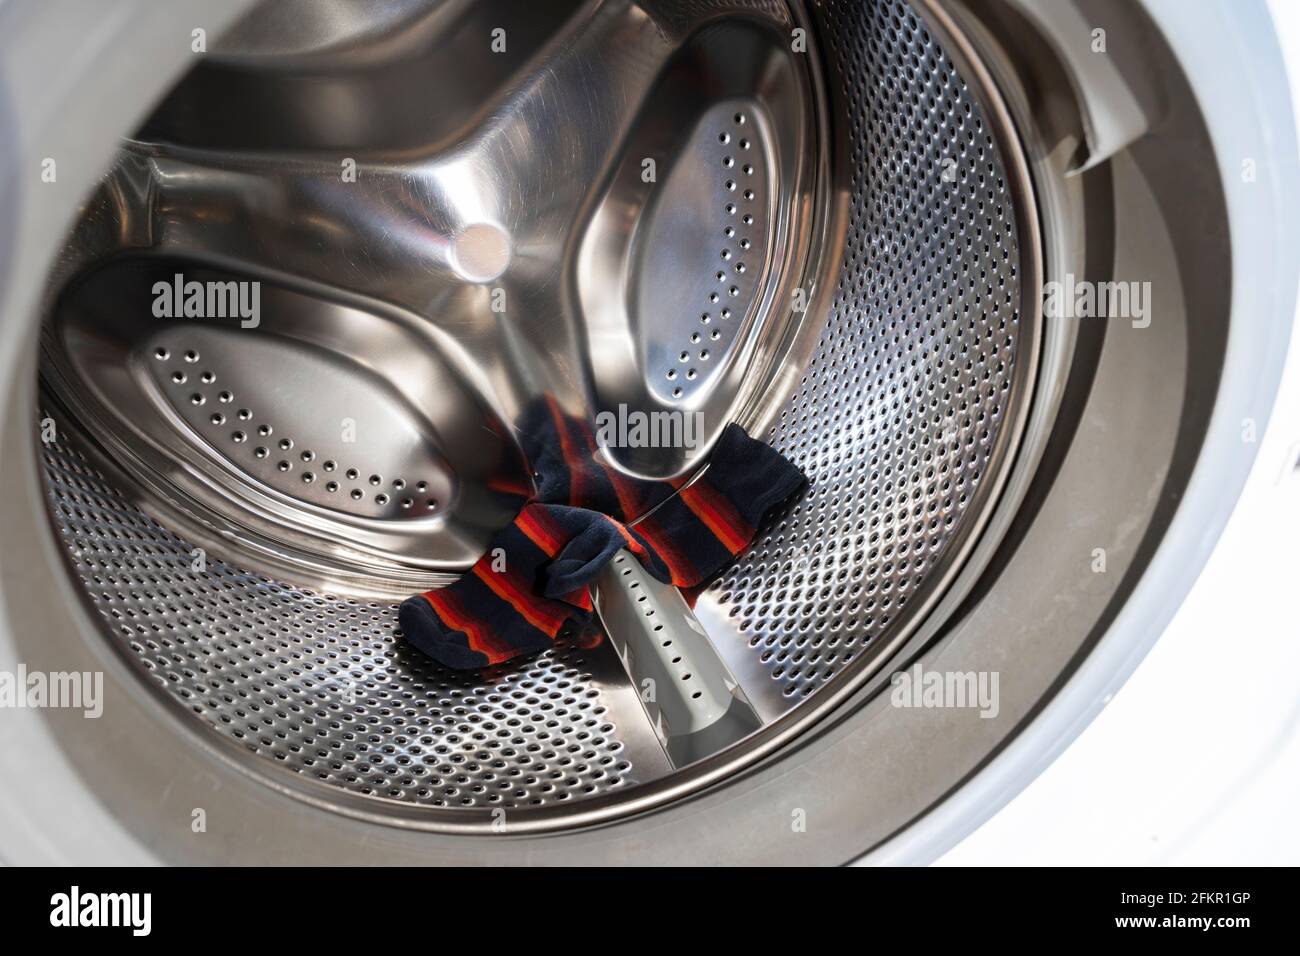 A single red striped sock in a washing machine laundry drum. Concept: the sock monster, sock fairy, hungry washing machine, supernatural cause Stock Photo